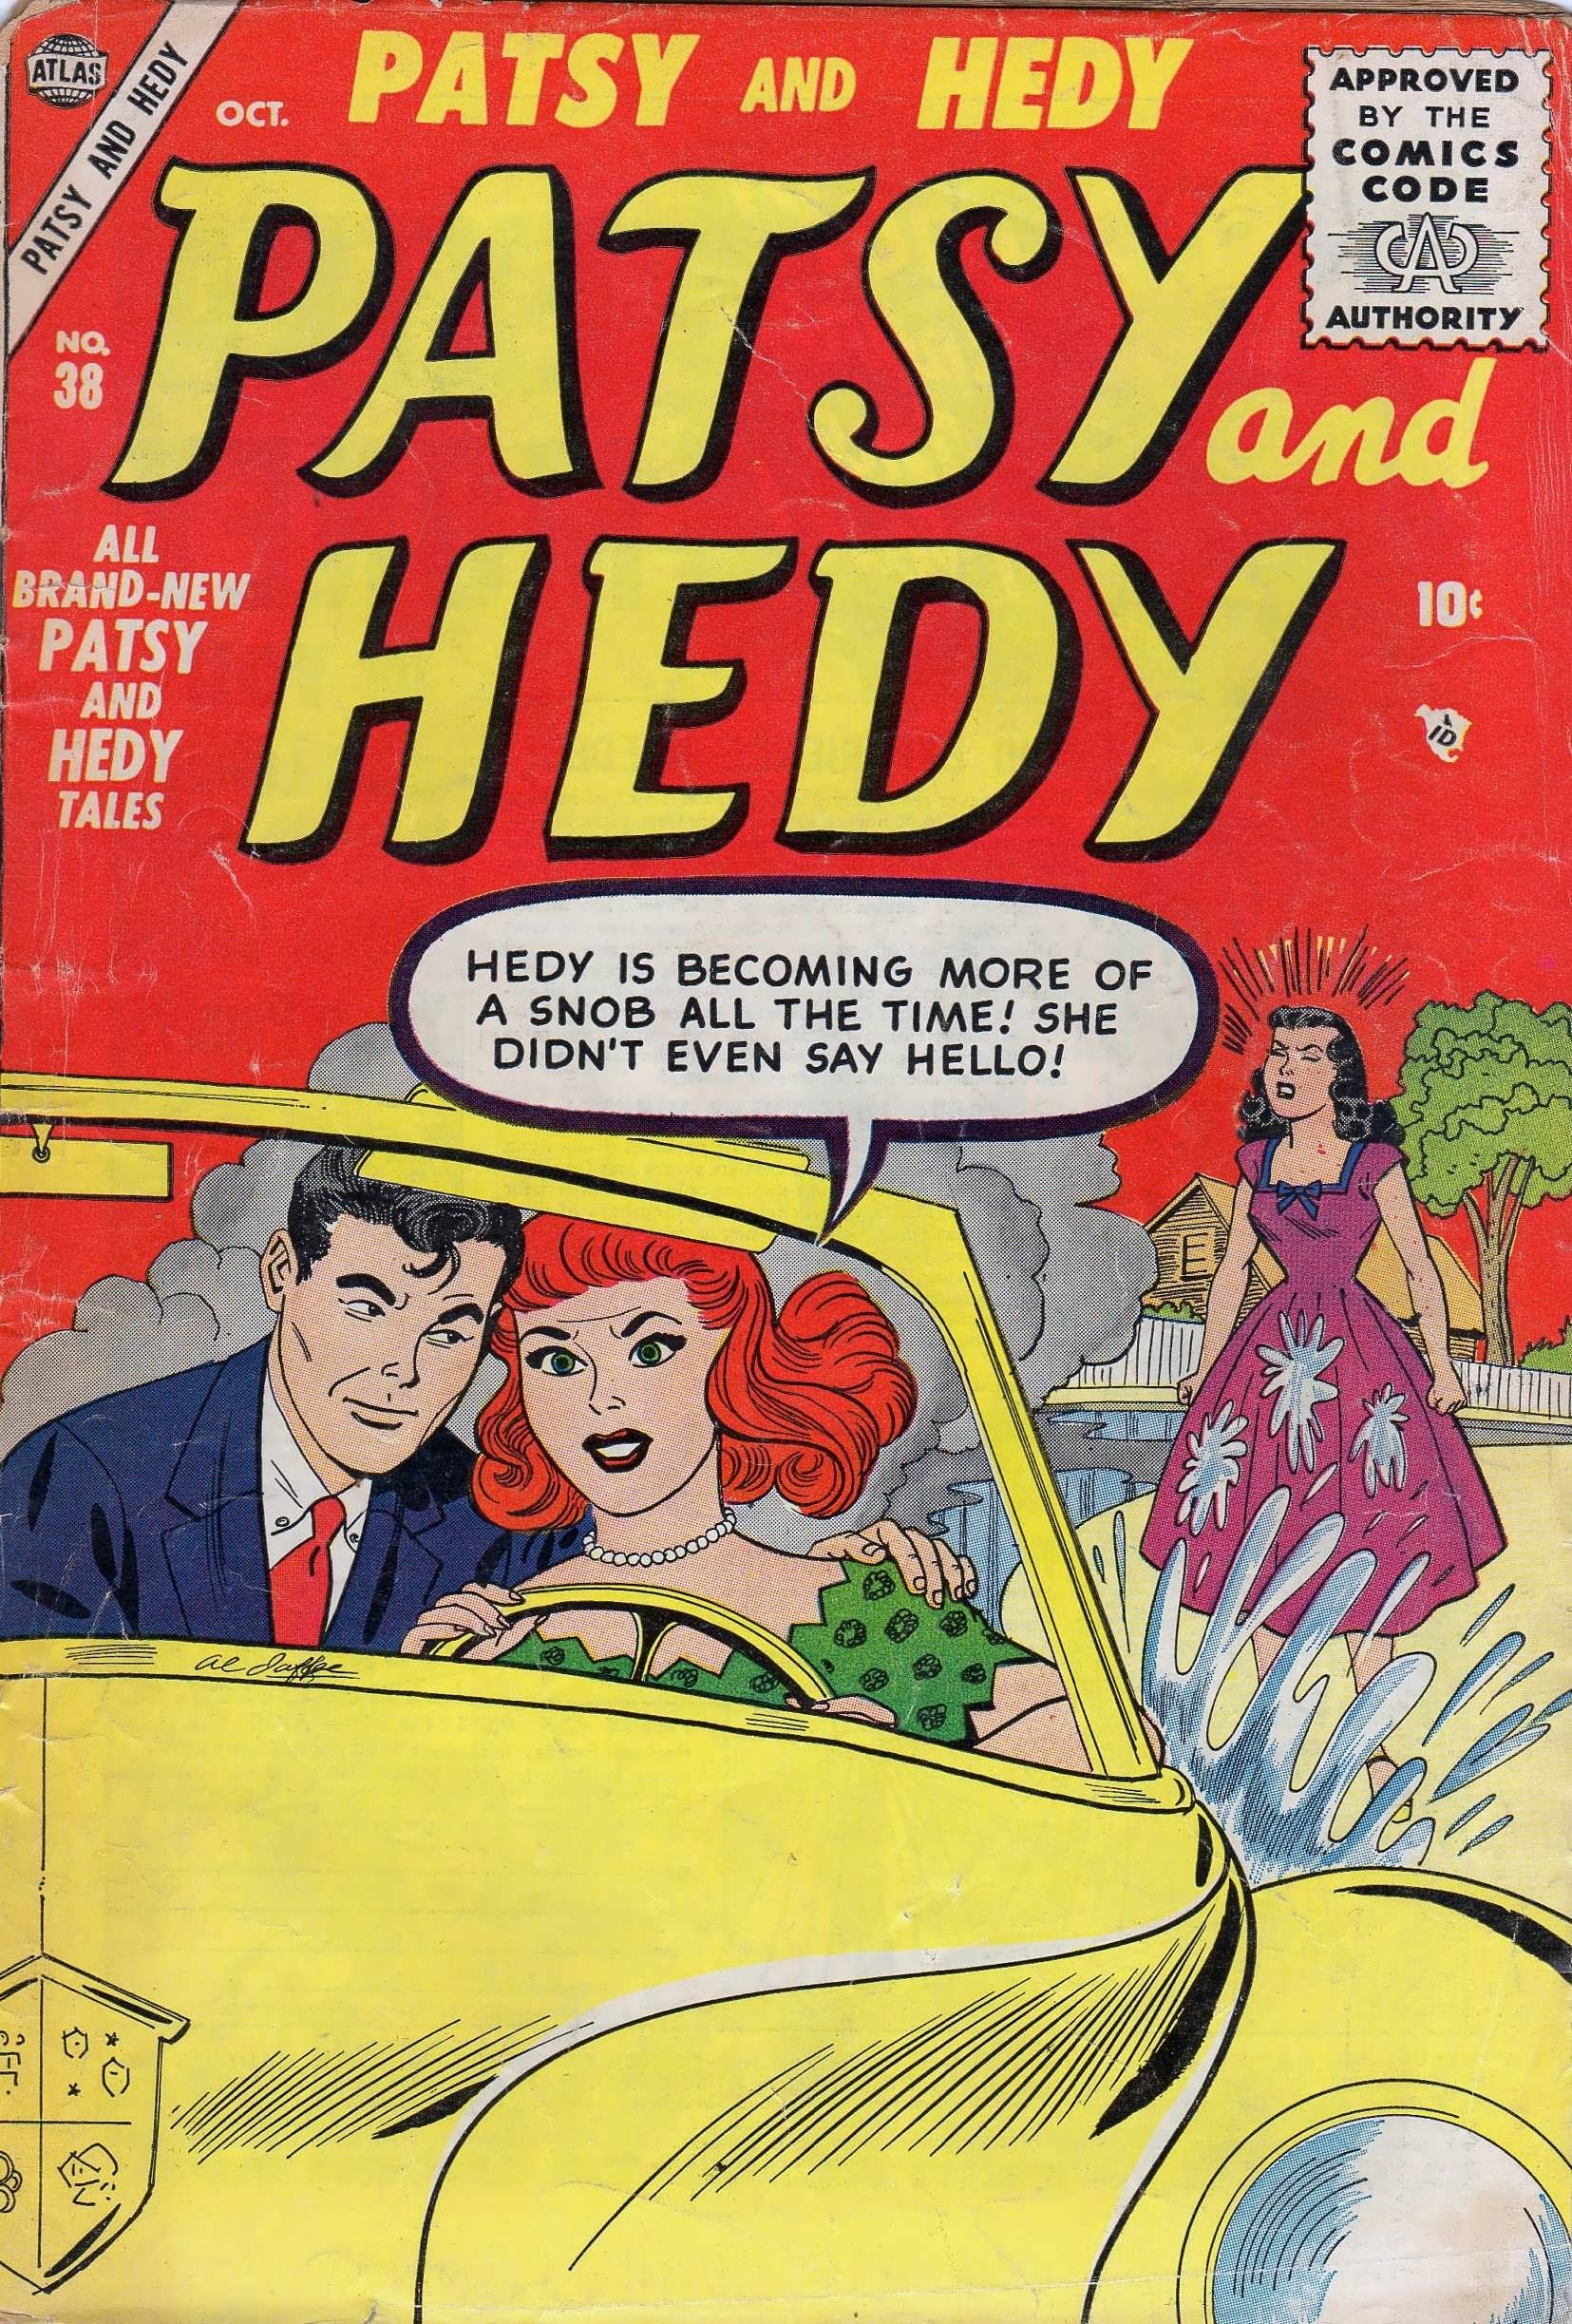 Read online Patsy and Hedy comic -  Issue #38 - 1